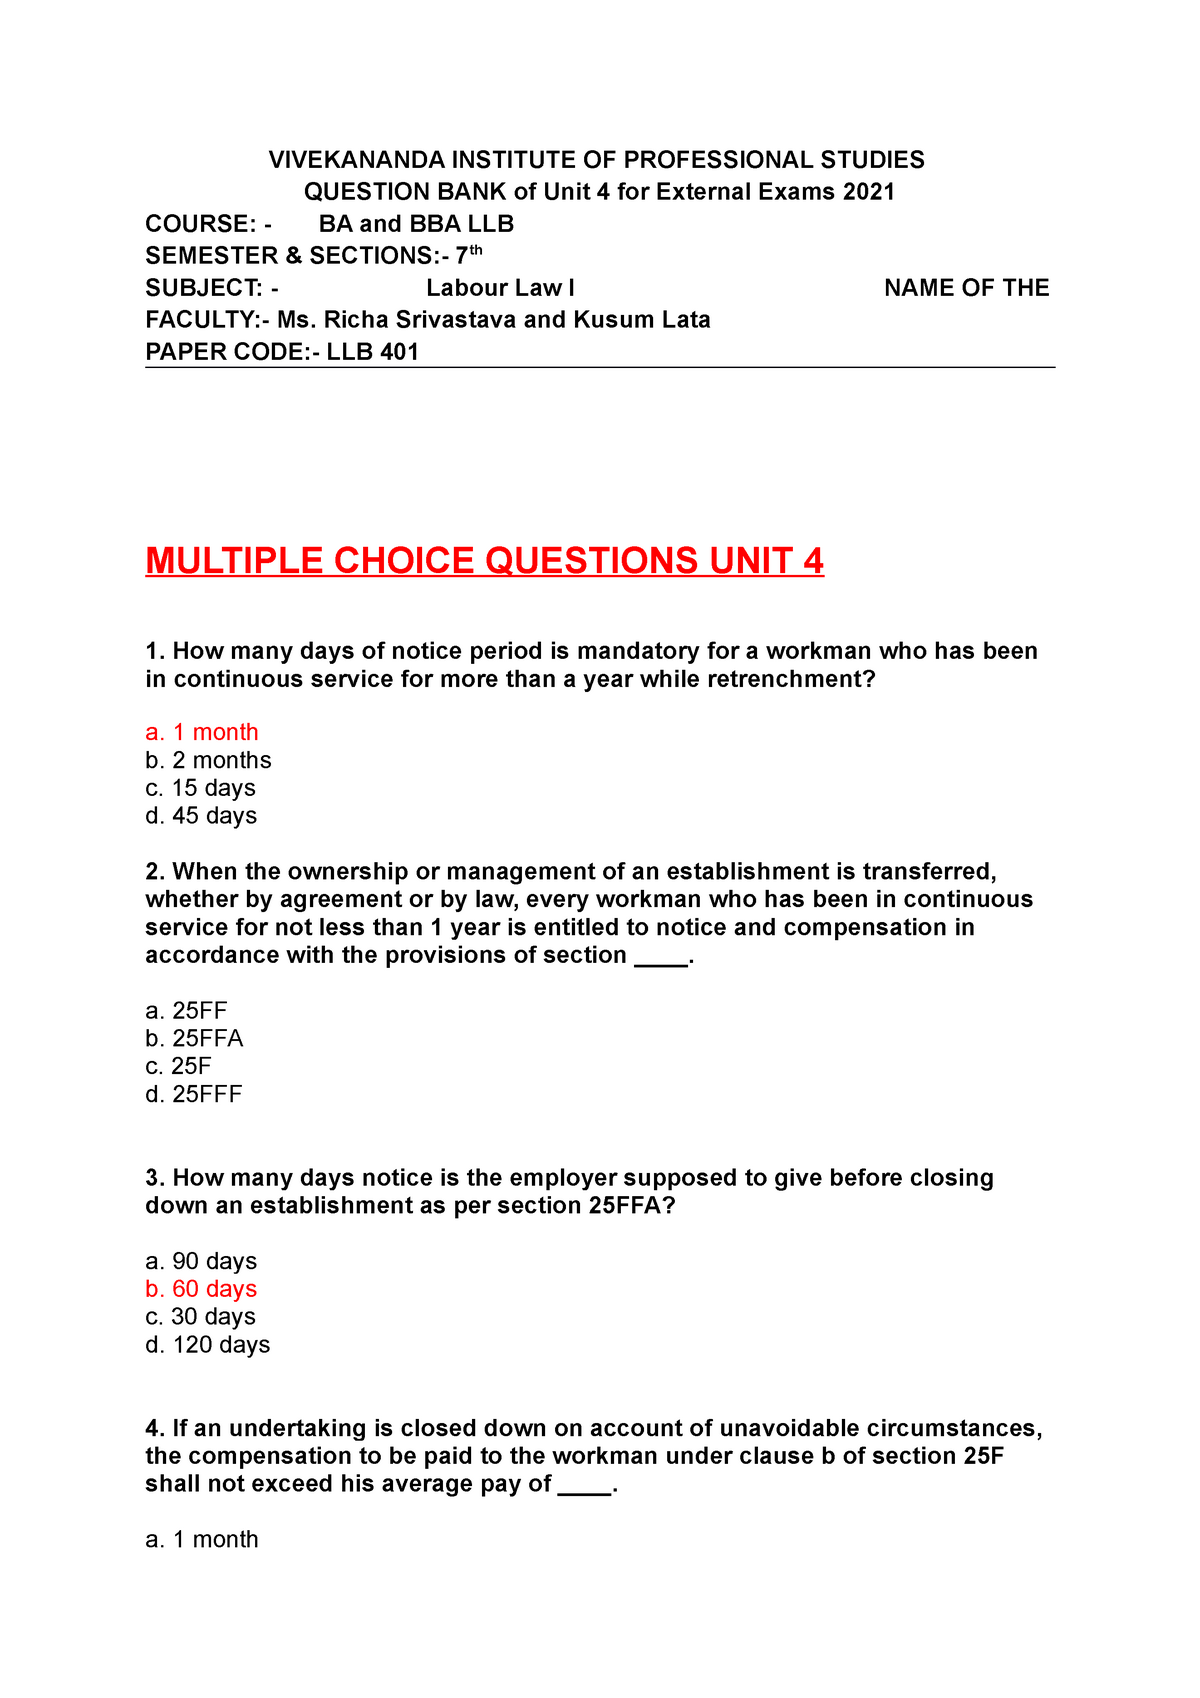 mcq questions on assignment problem